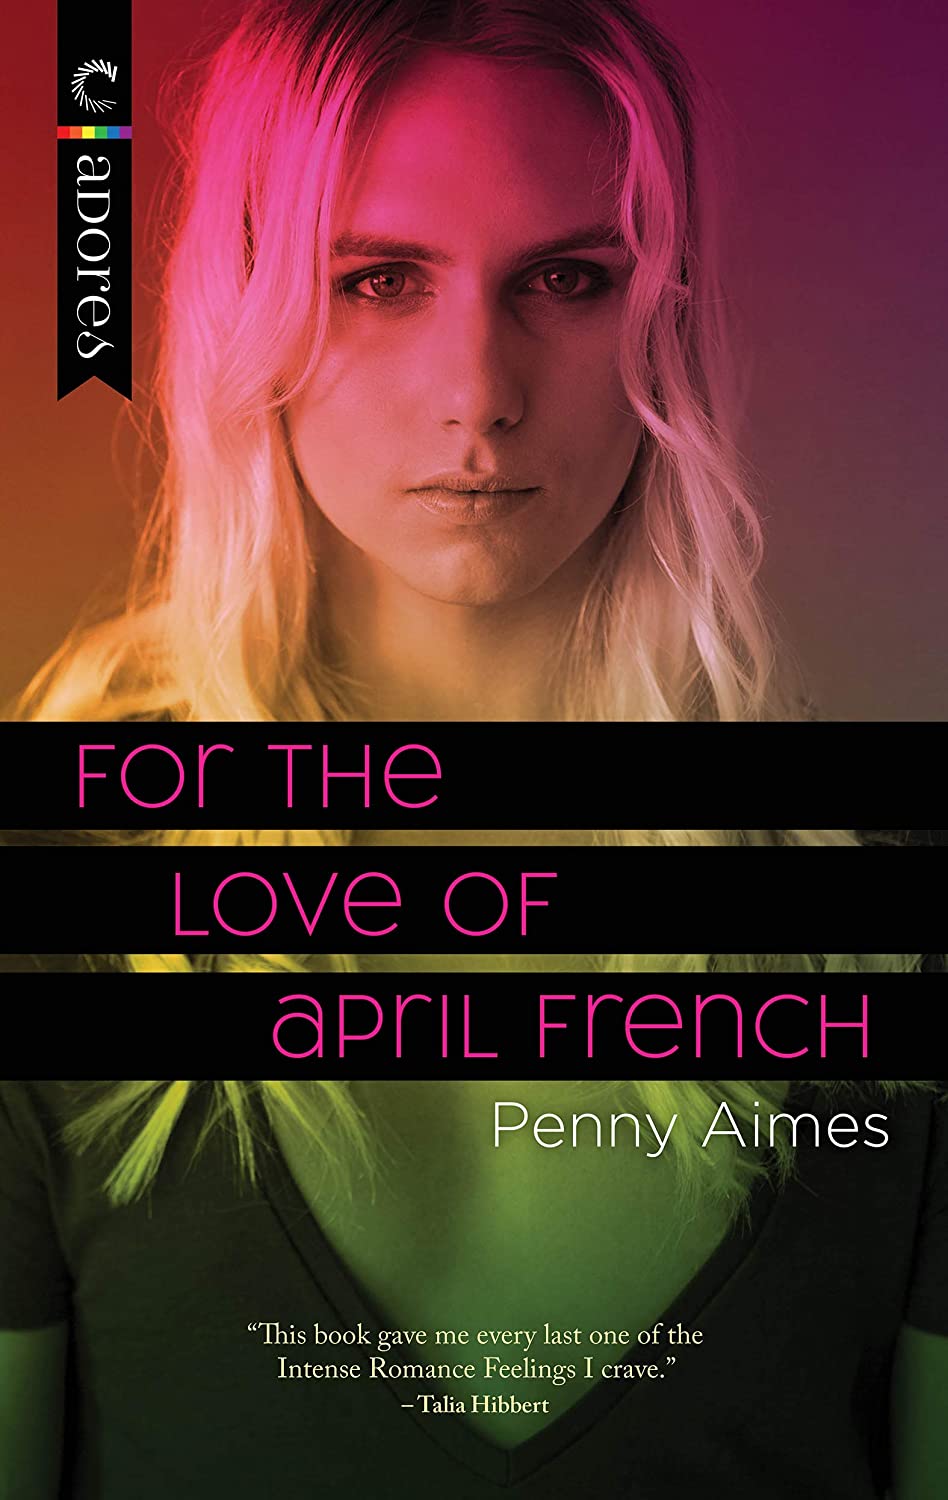 Book Review: For the Love of April French by Penny Aimes (romance)